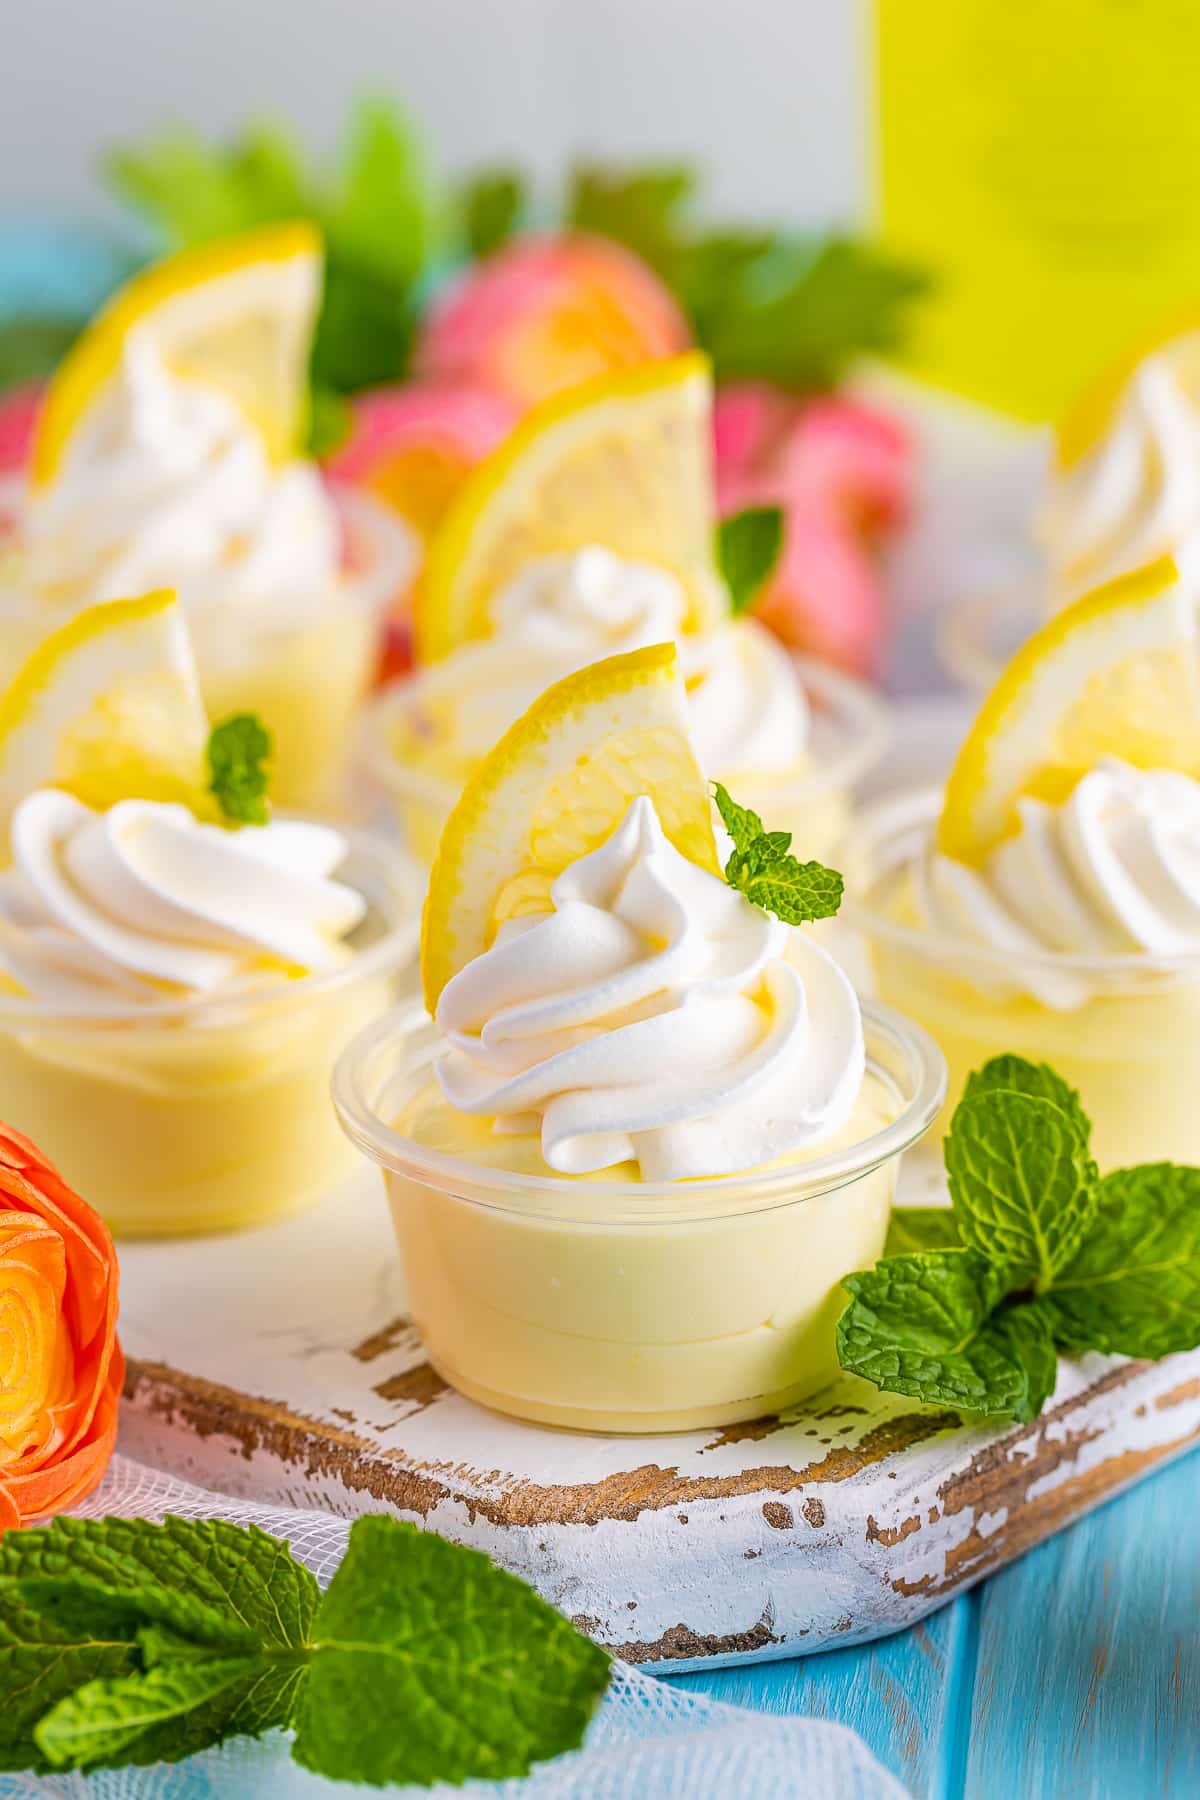 Upclose image of lemon pudding shot on a white wooden serving platter sitting on blue wood table top, fresh mint, lemons, and flowers